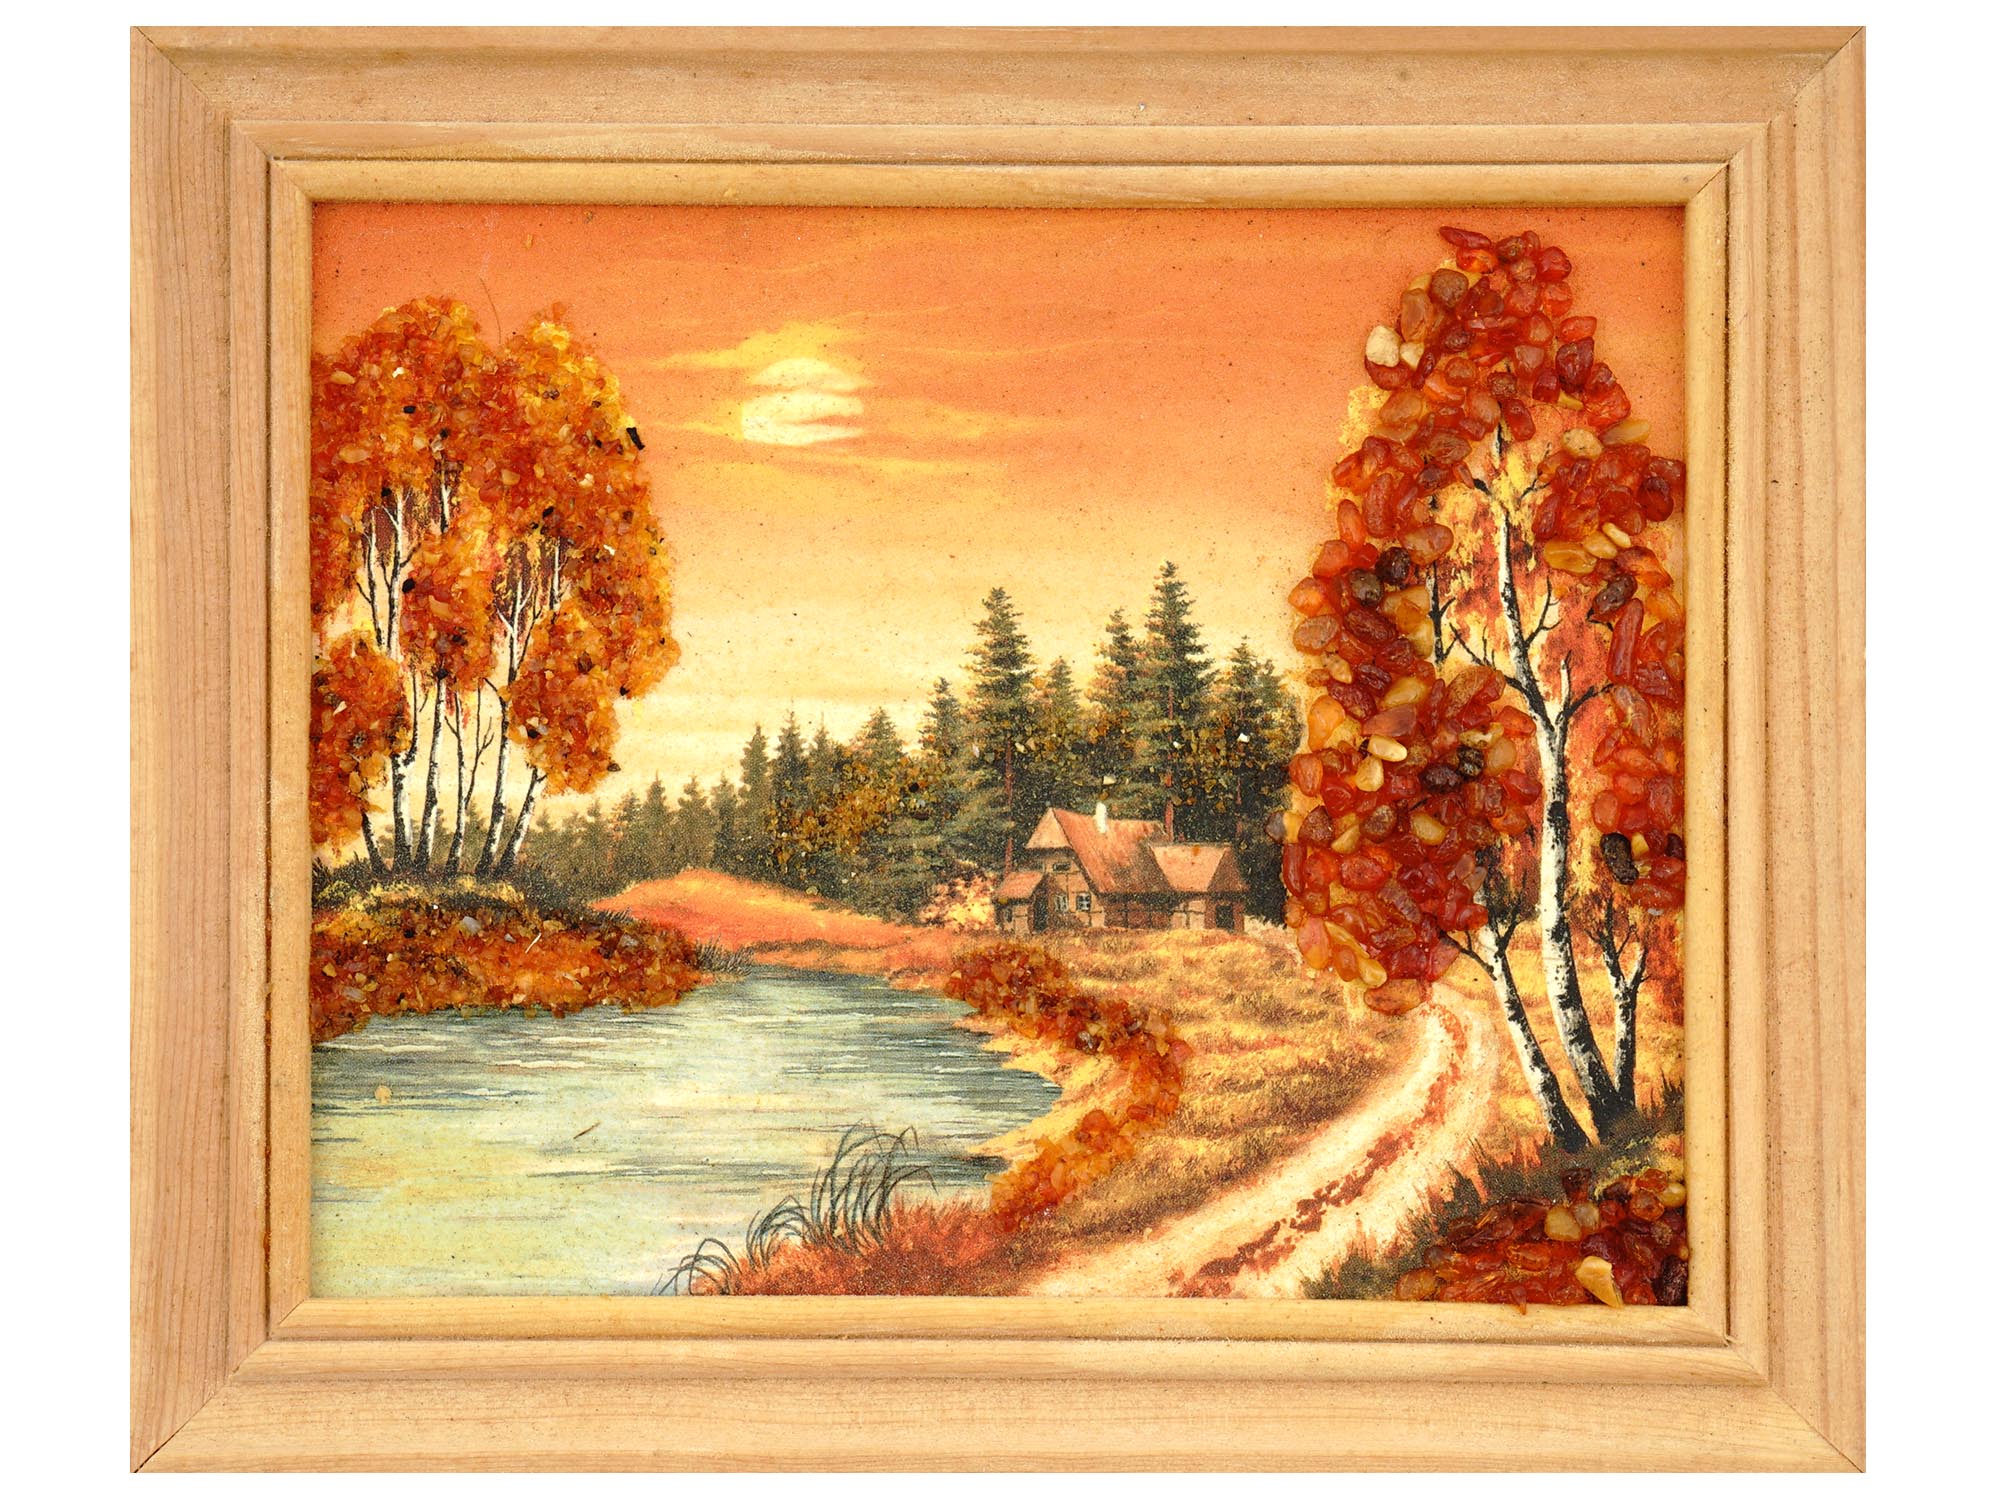 FRAMED AMBER AND SAND AUTUMN LANDSCAPE PAINTINGS PIC-1